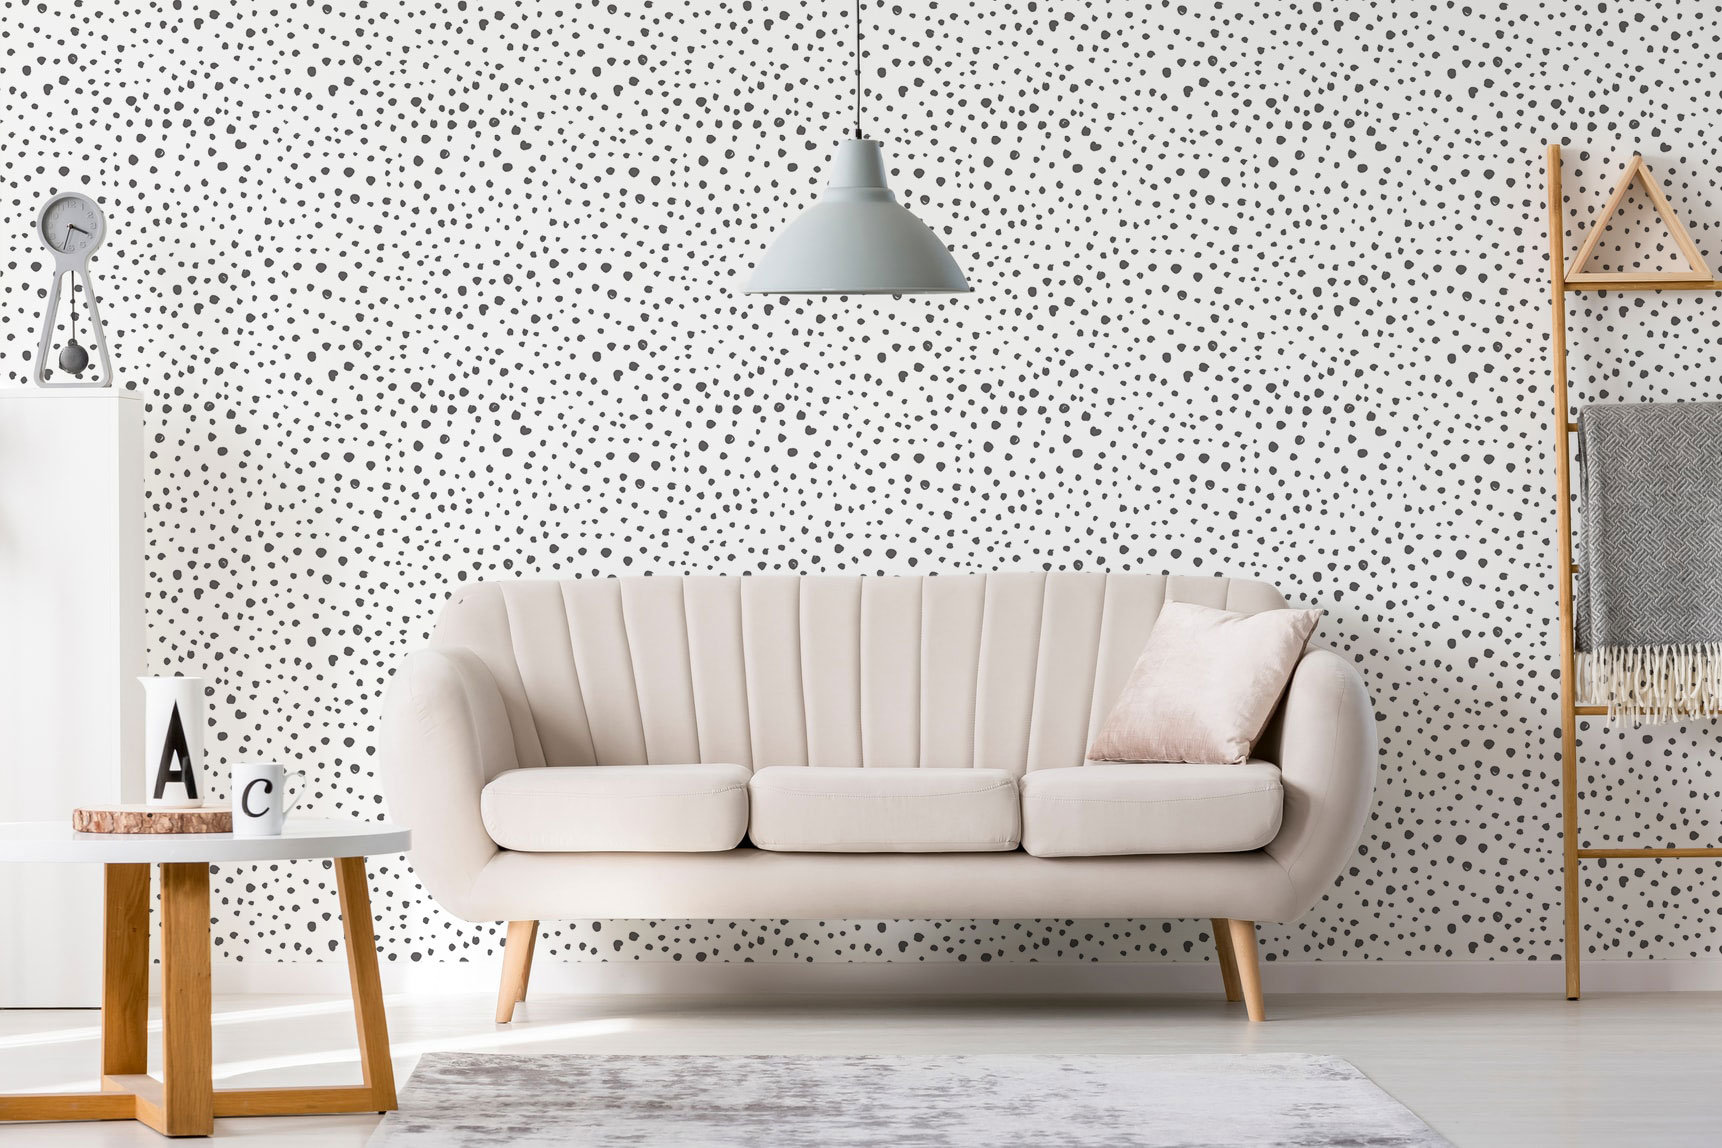 Black And White Polka Dots Peel And Stick Wallpaper - 2 Seater Sofa Set Latest Designs , HD Wallpaper & Backgrounds